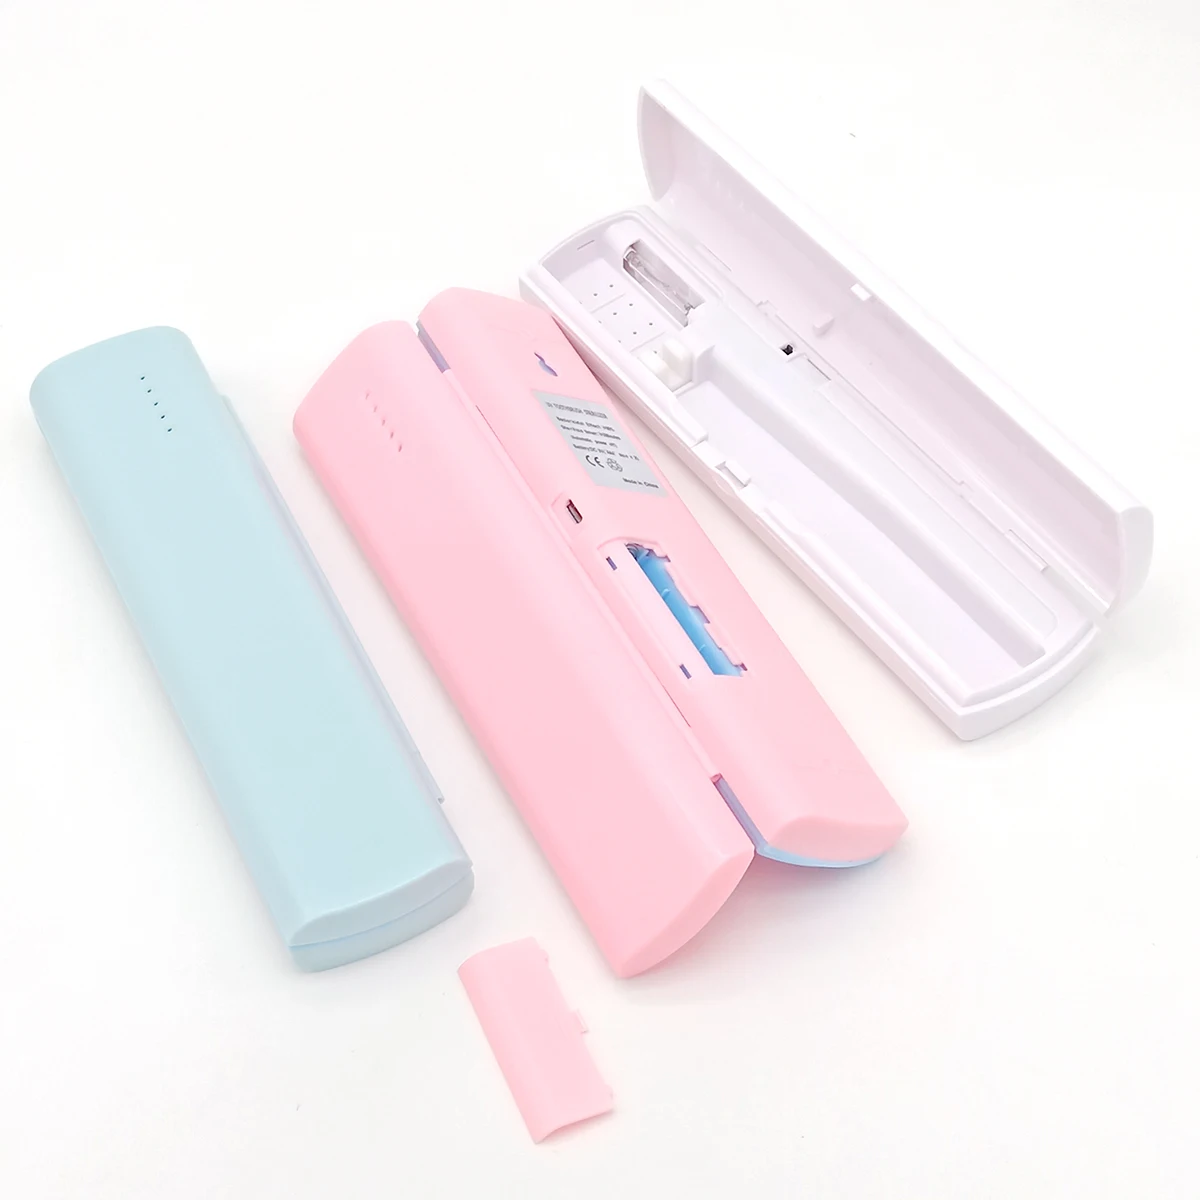 Sterilizing Rate To Kill Portable Battery Uv Led Toothbrush Sterilizer Cleaning Company Technology